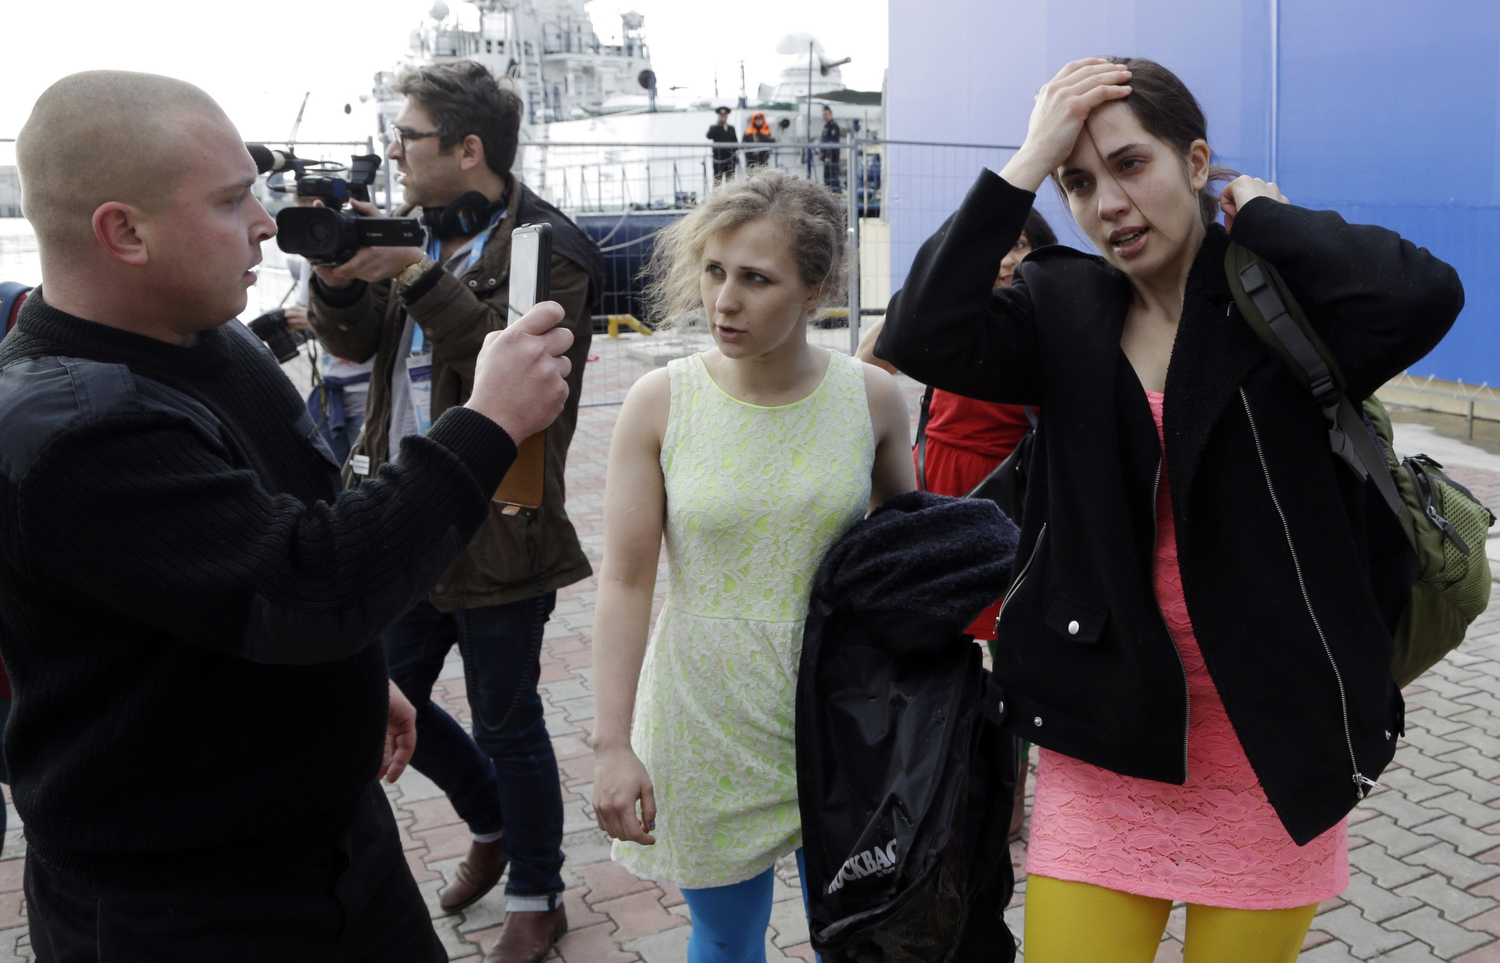 A Russian security officer records members of the punk group Pussy Riot Nadezhda Tolokonnikova, right, and Maria Alekhina, center, after they were attacked by Cossack militia in Sochi, Russia, on Wednesday, Feb. 19, 2014.